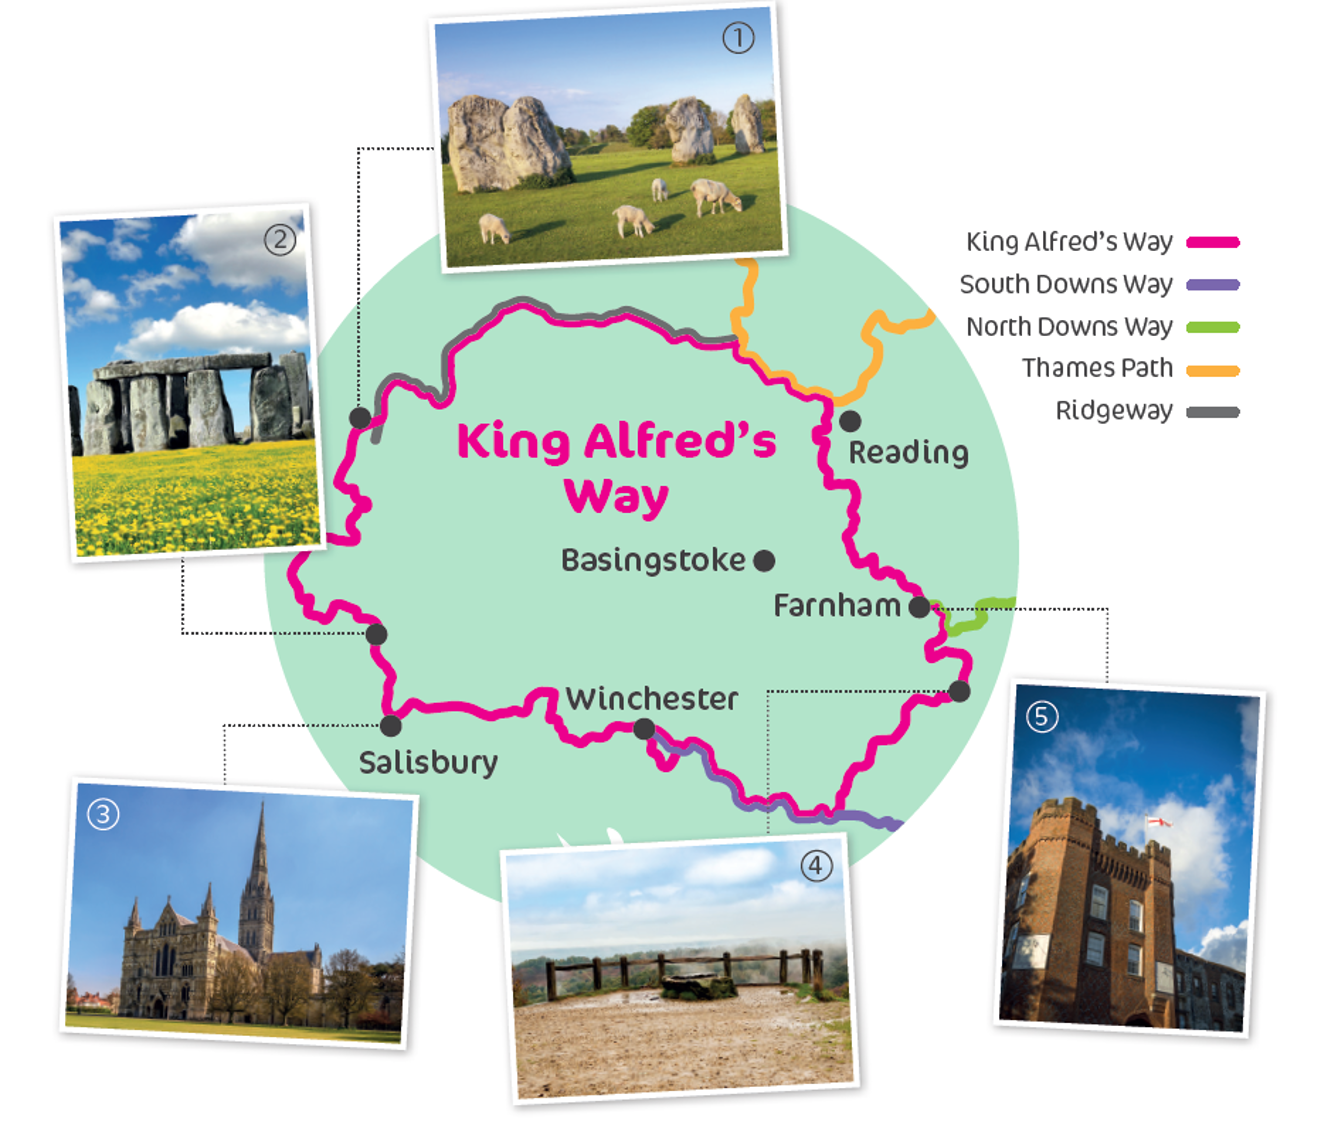 King Alfred's Way route map